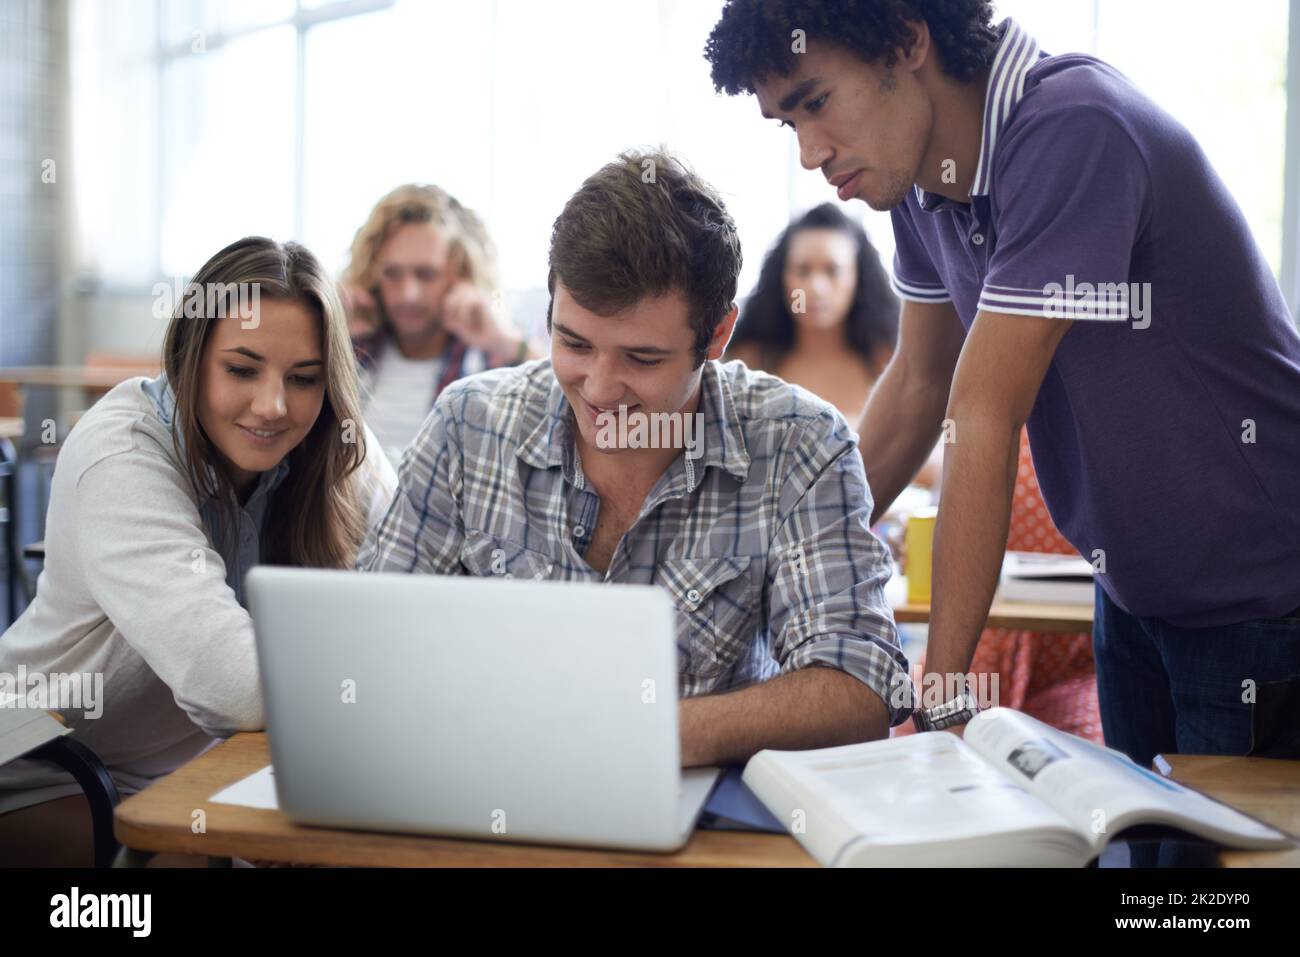 Using every resource for their project. Shot of a group of university students working on laptops in class. Stock Photo